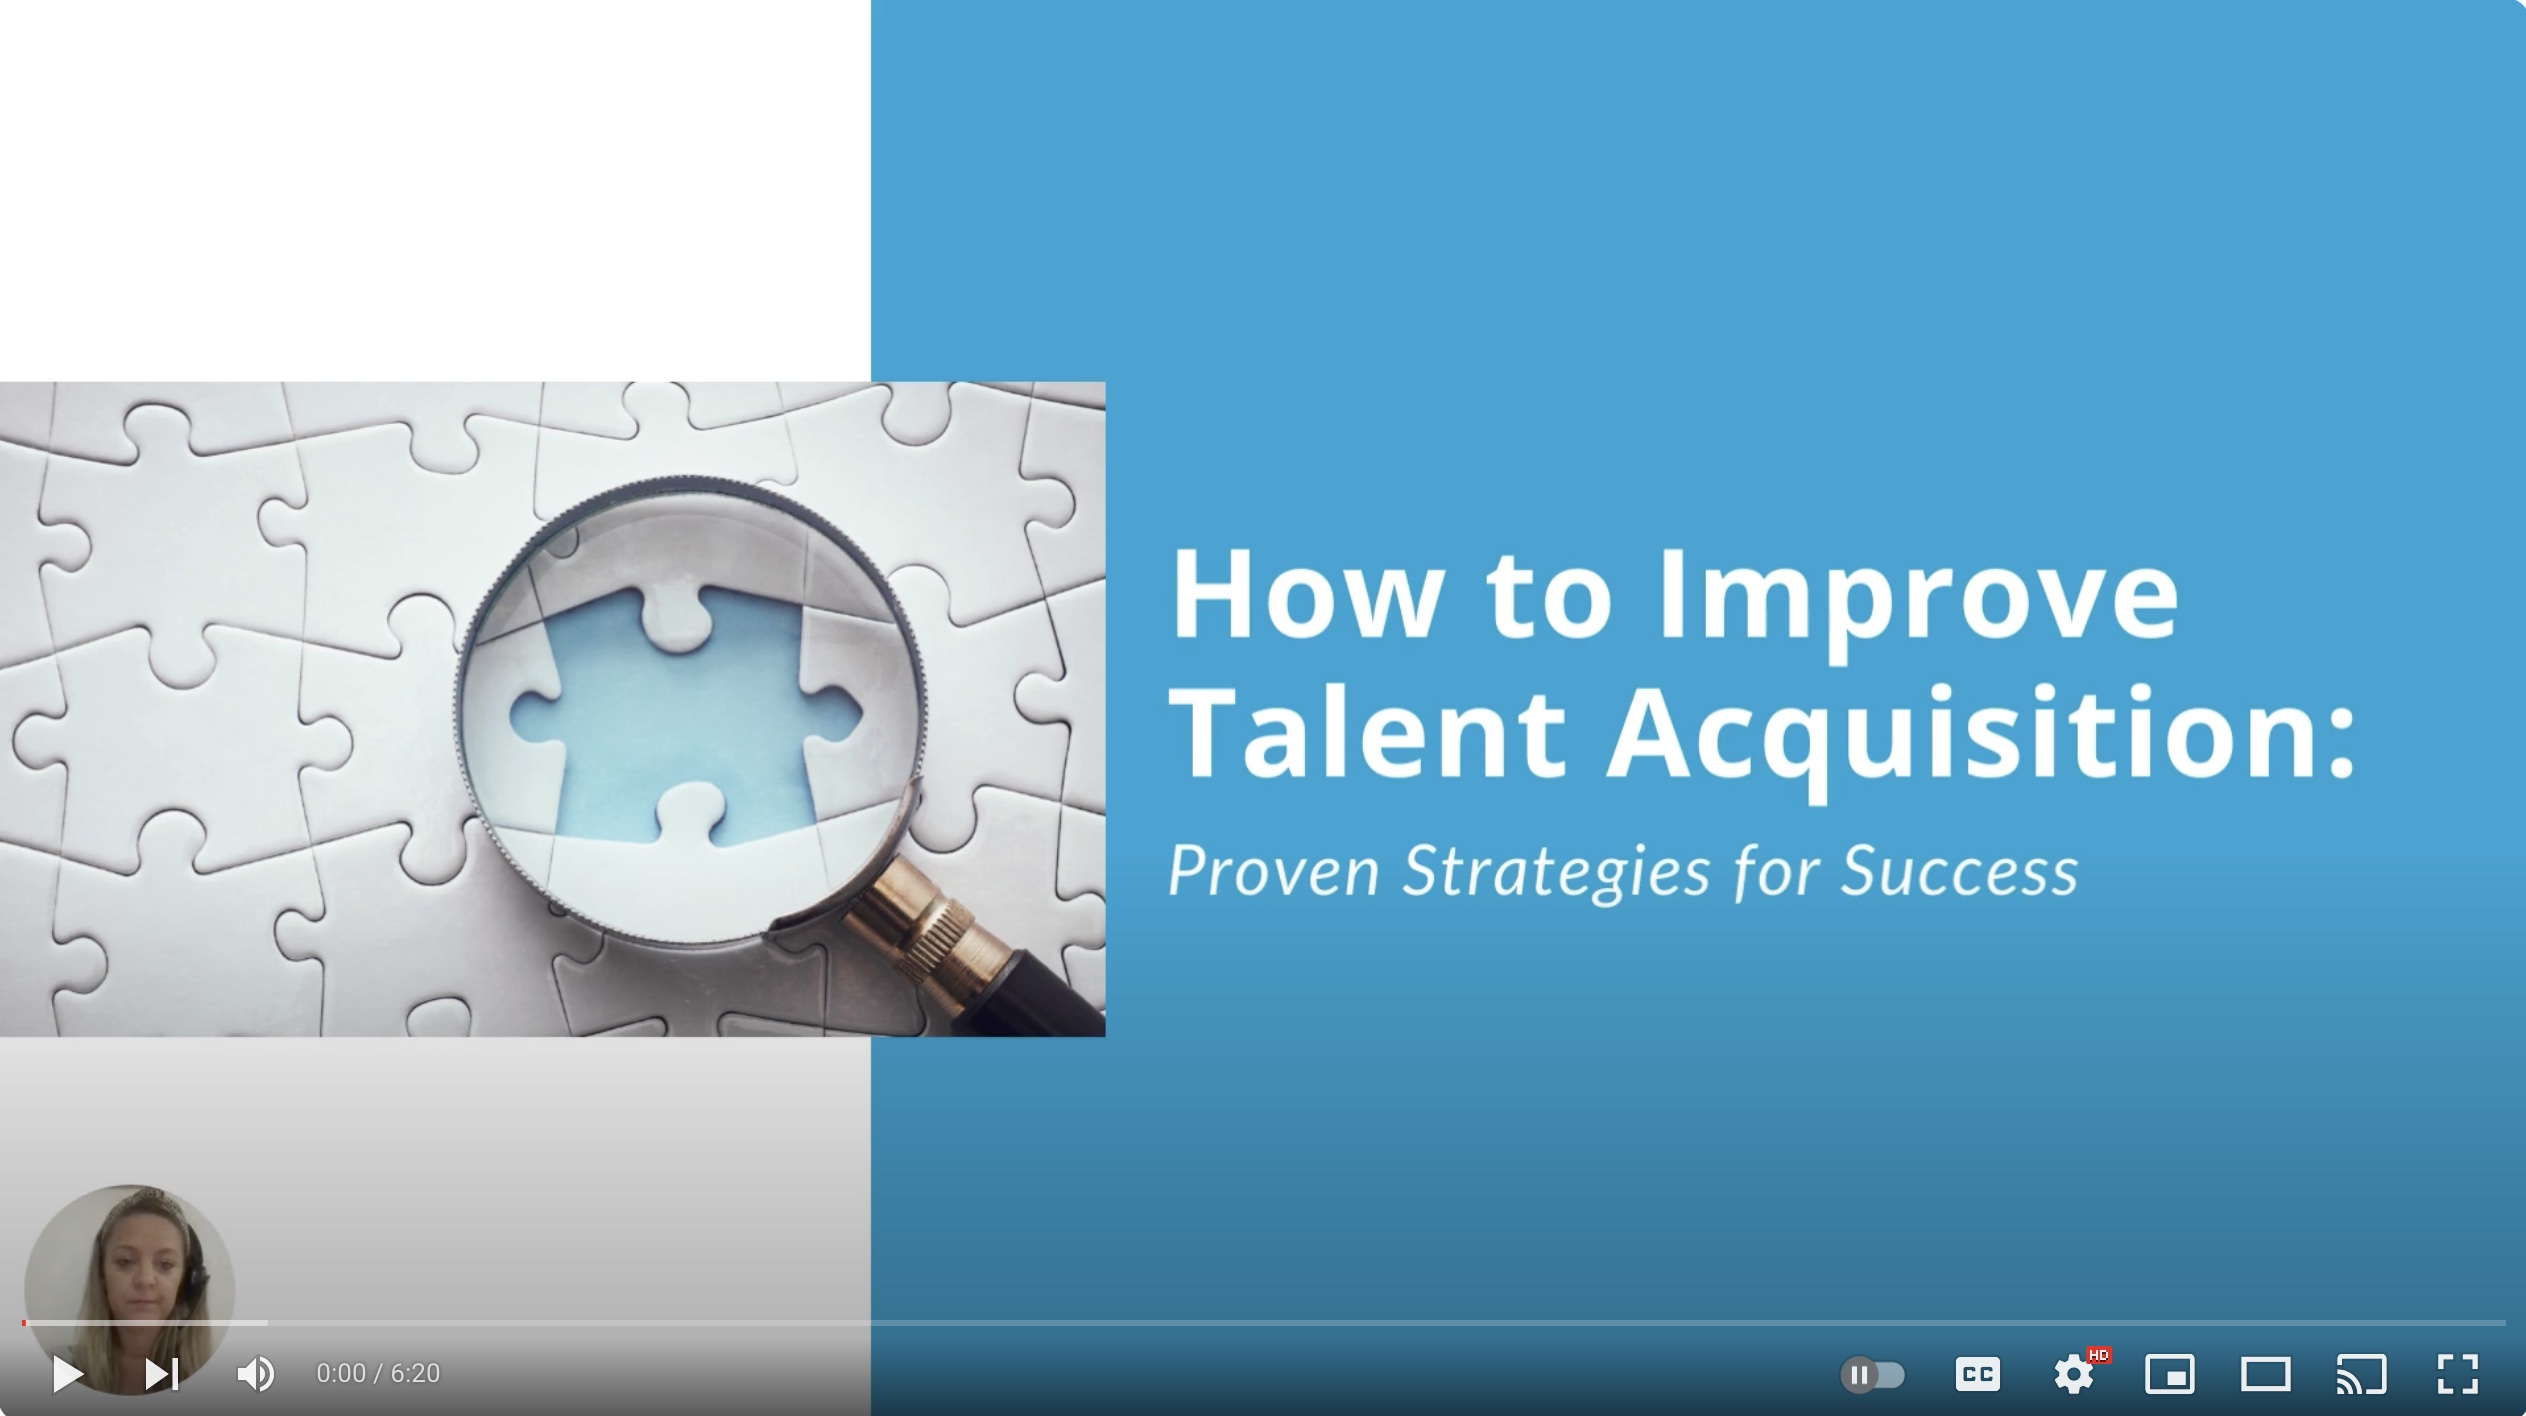 How to Improve Talent Acquisition: Proven Strategies for Success